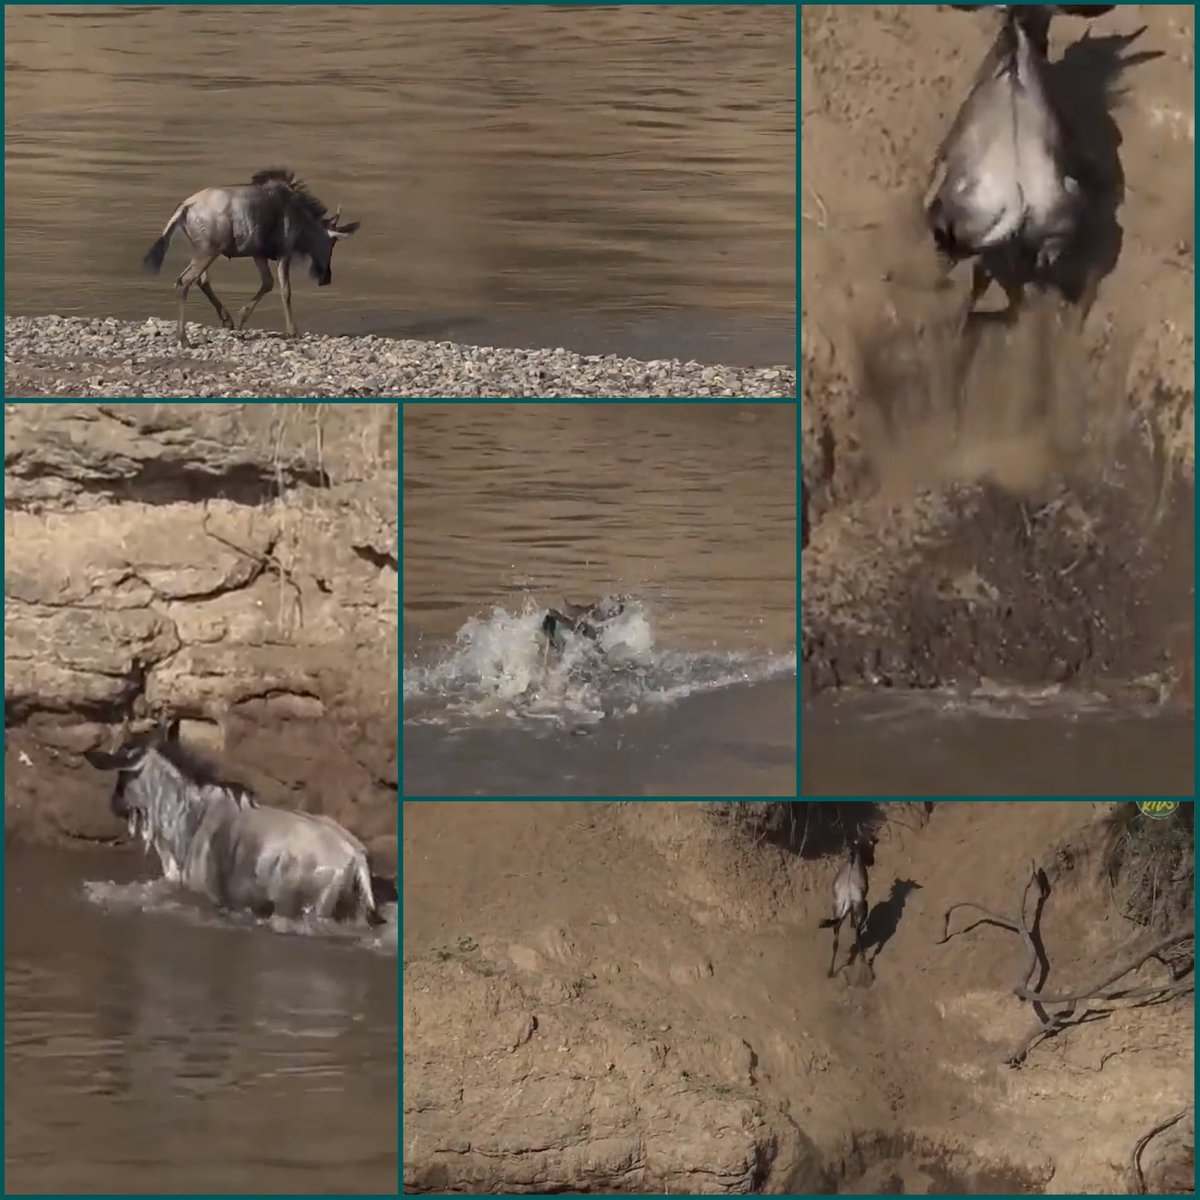 ViCtOrY!  My ❤️was beating so fast as this young Wildebeest crossed the Croc infested MaraRiver on #safarilive